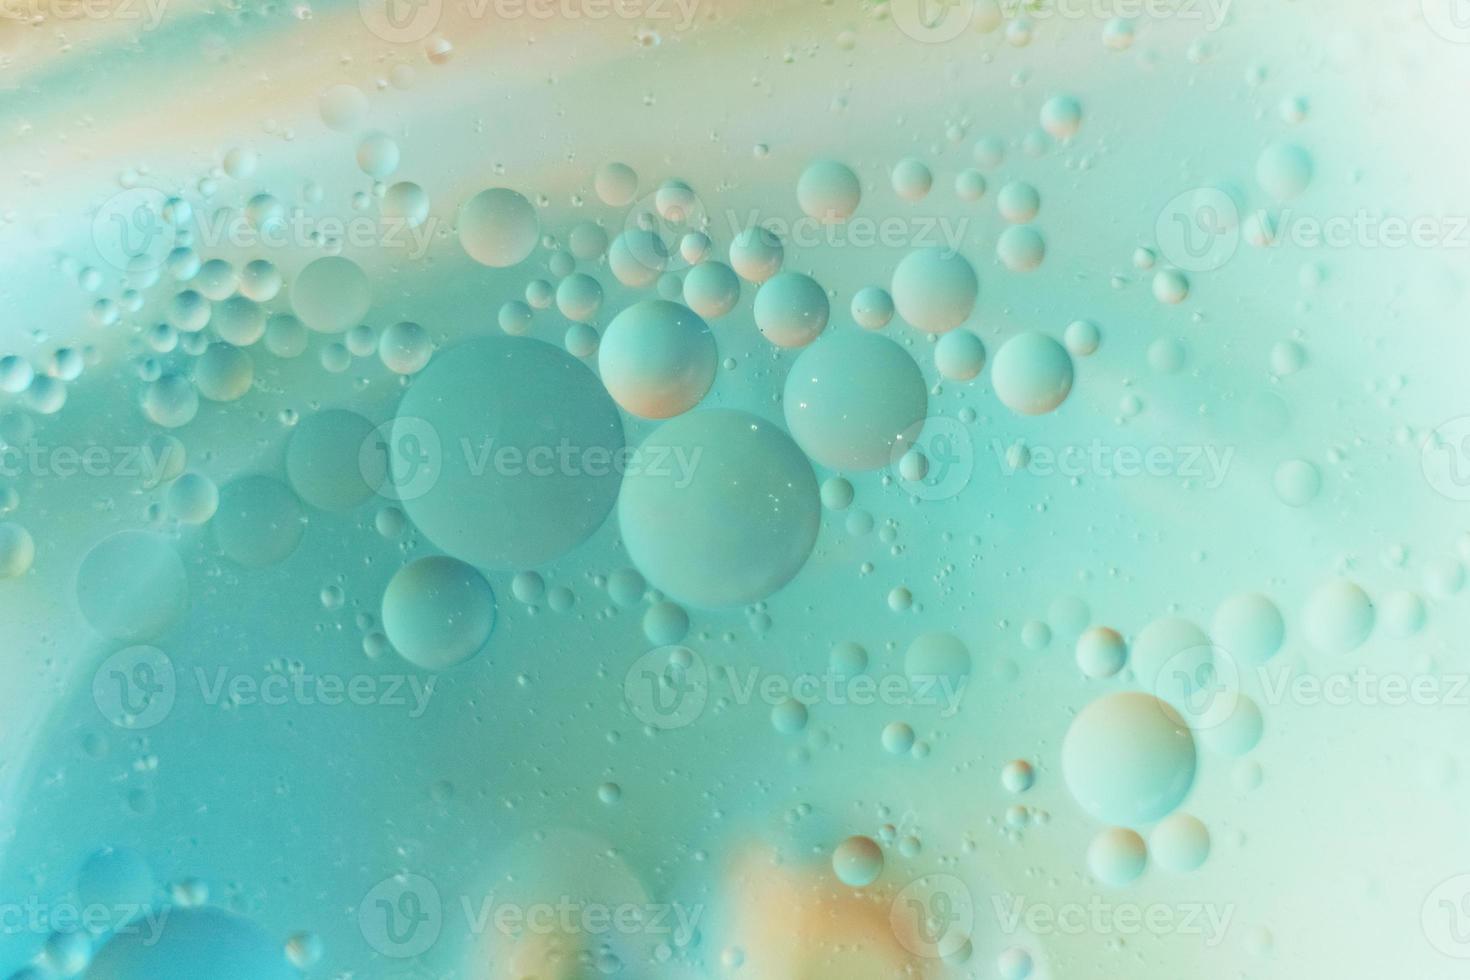 Macro photo of oil droplets in water on a green blue blurred background